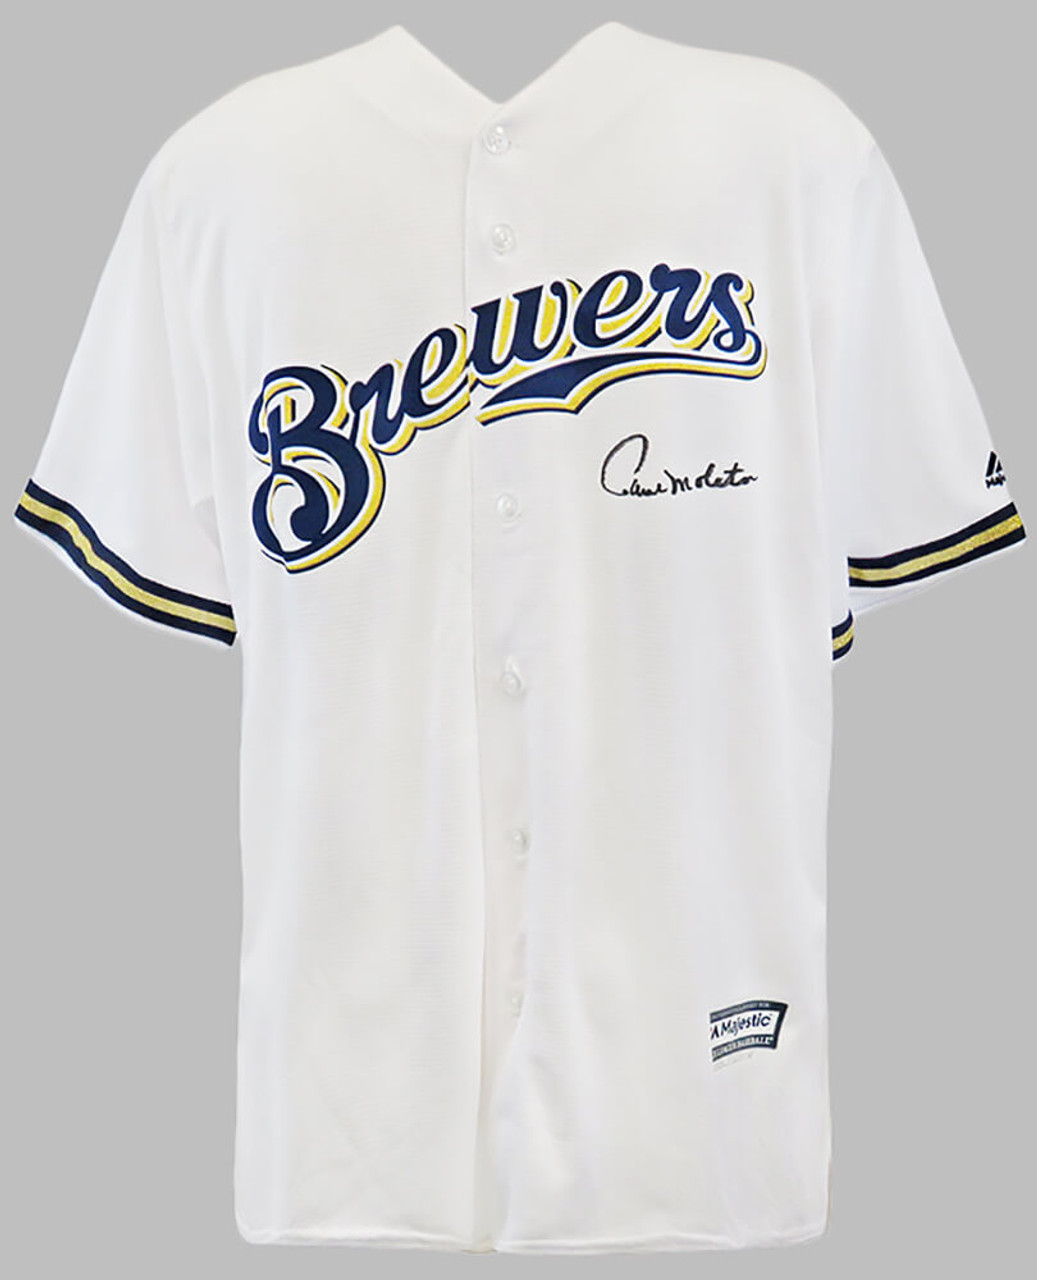 Paul Molitor Signed Milwaukee Brewers Majestic Jersey - Schwartz  Authenticated